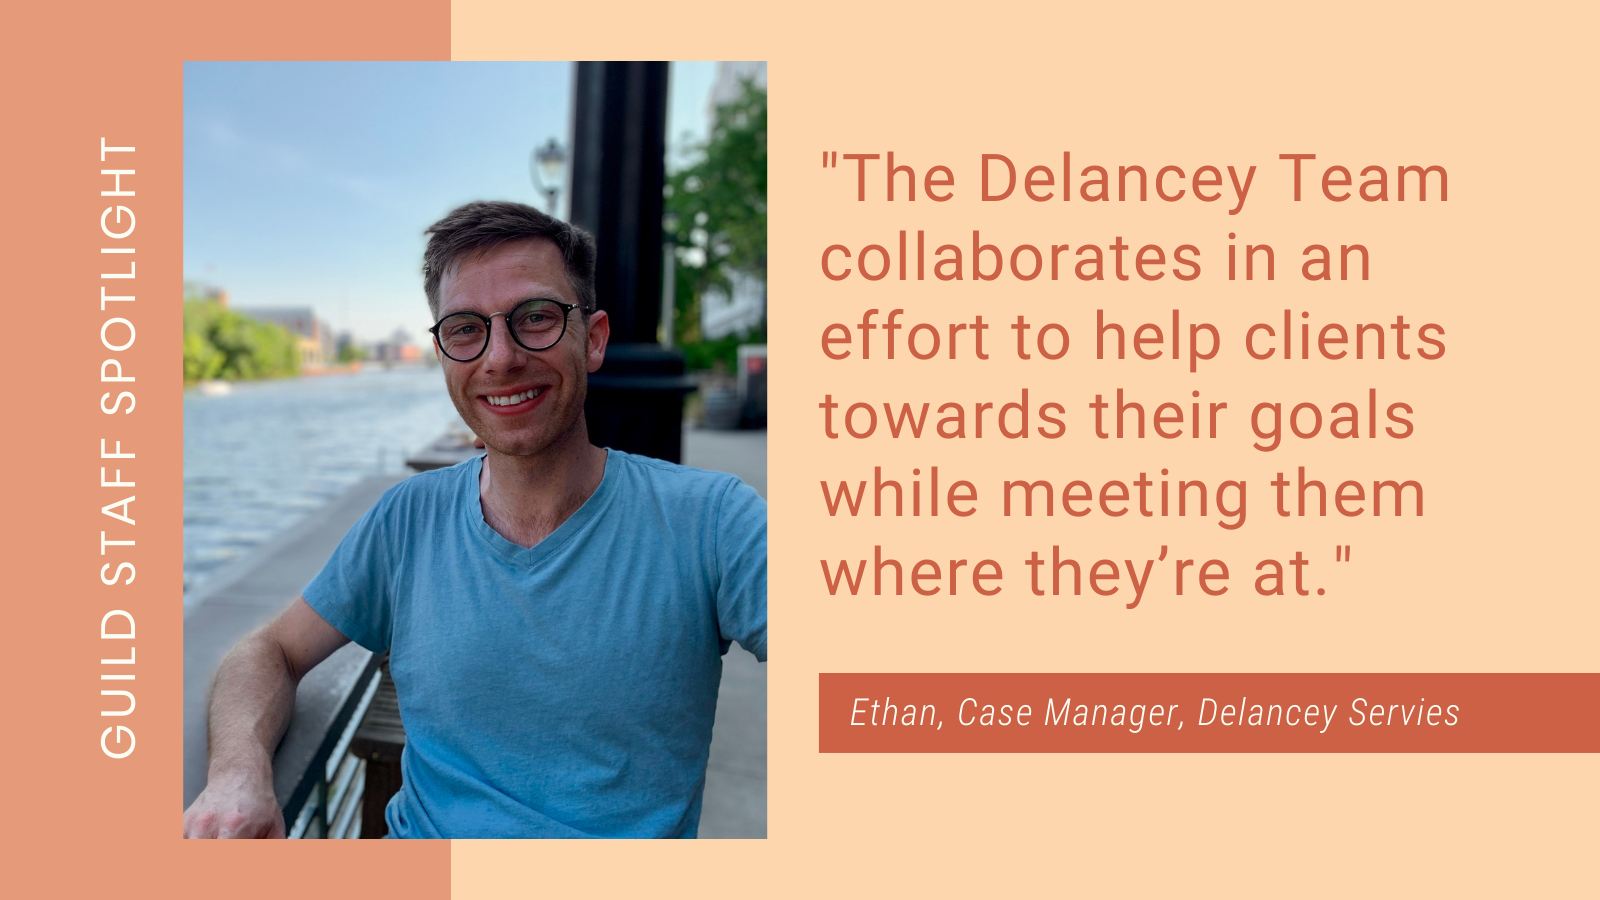 Ethan, Case Manager